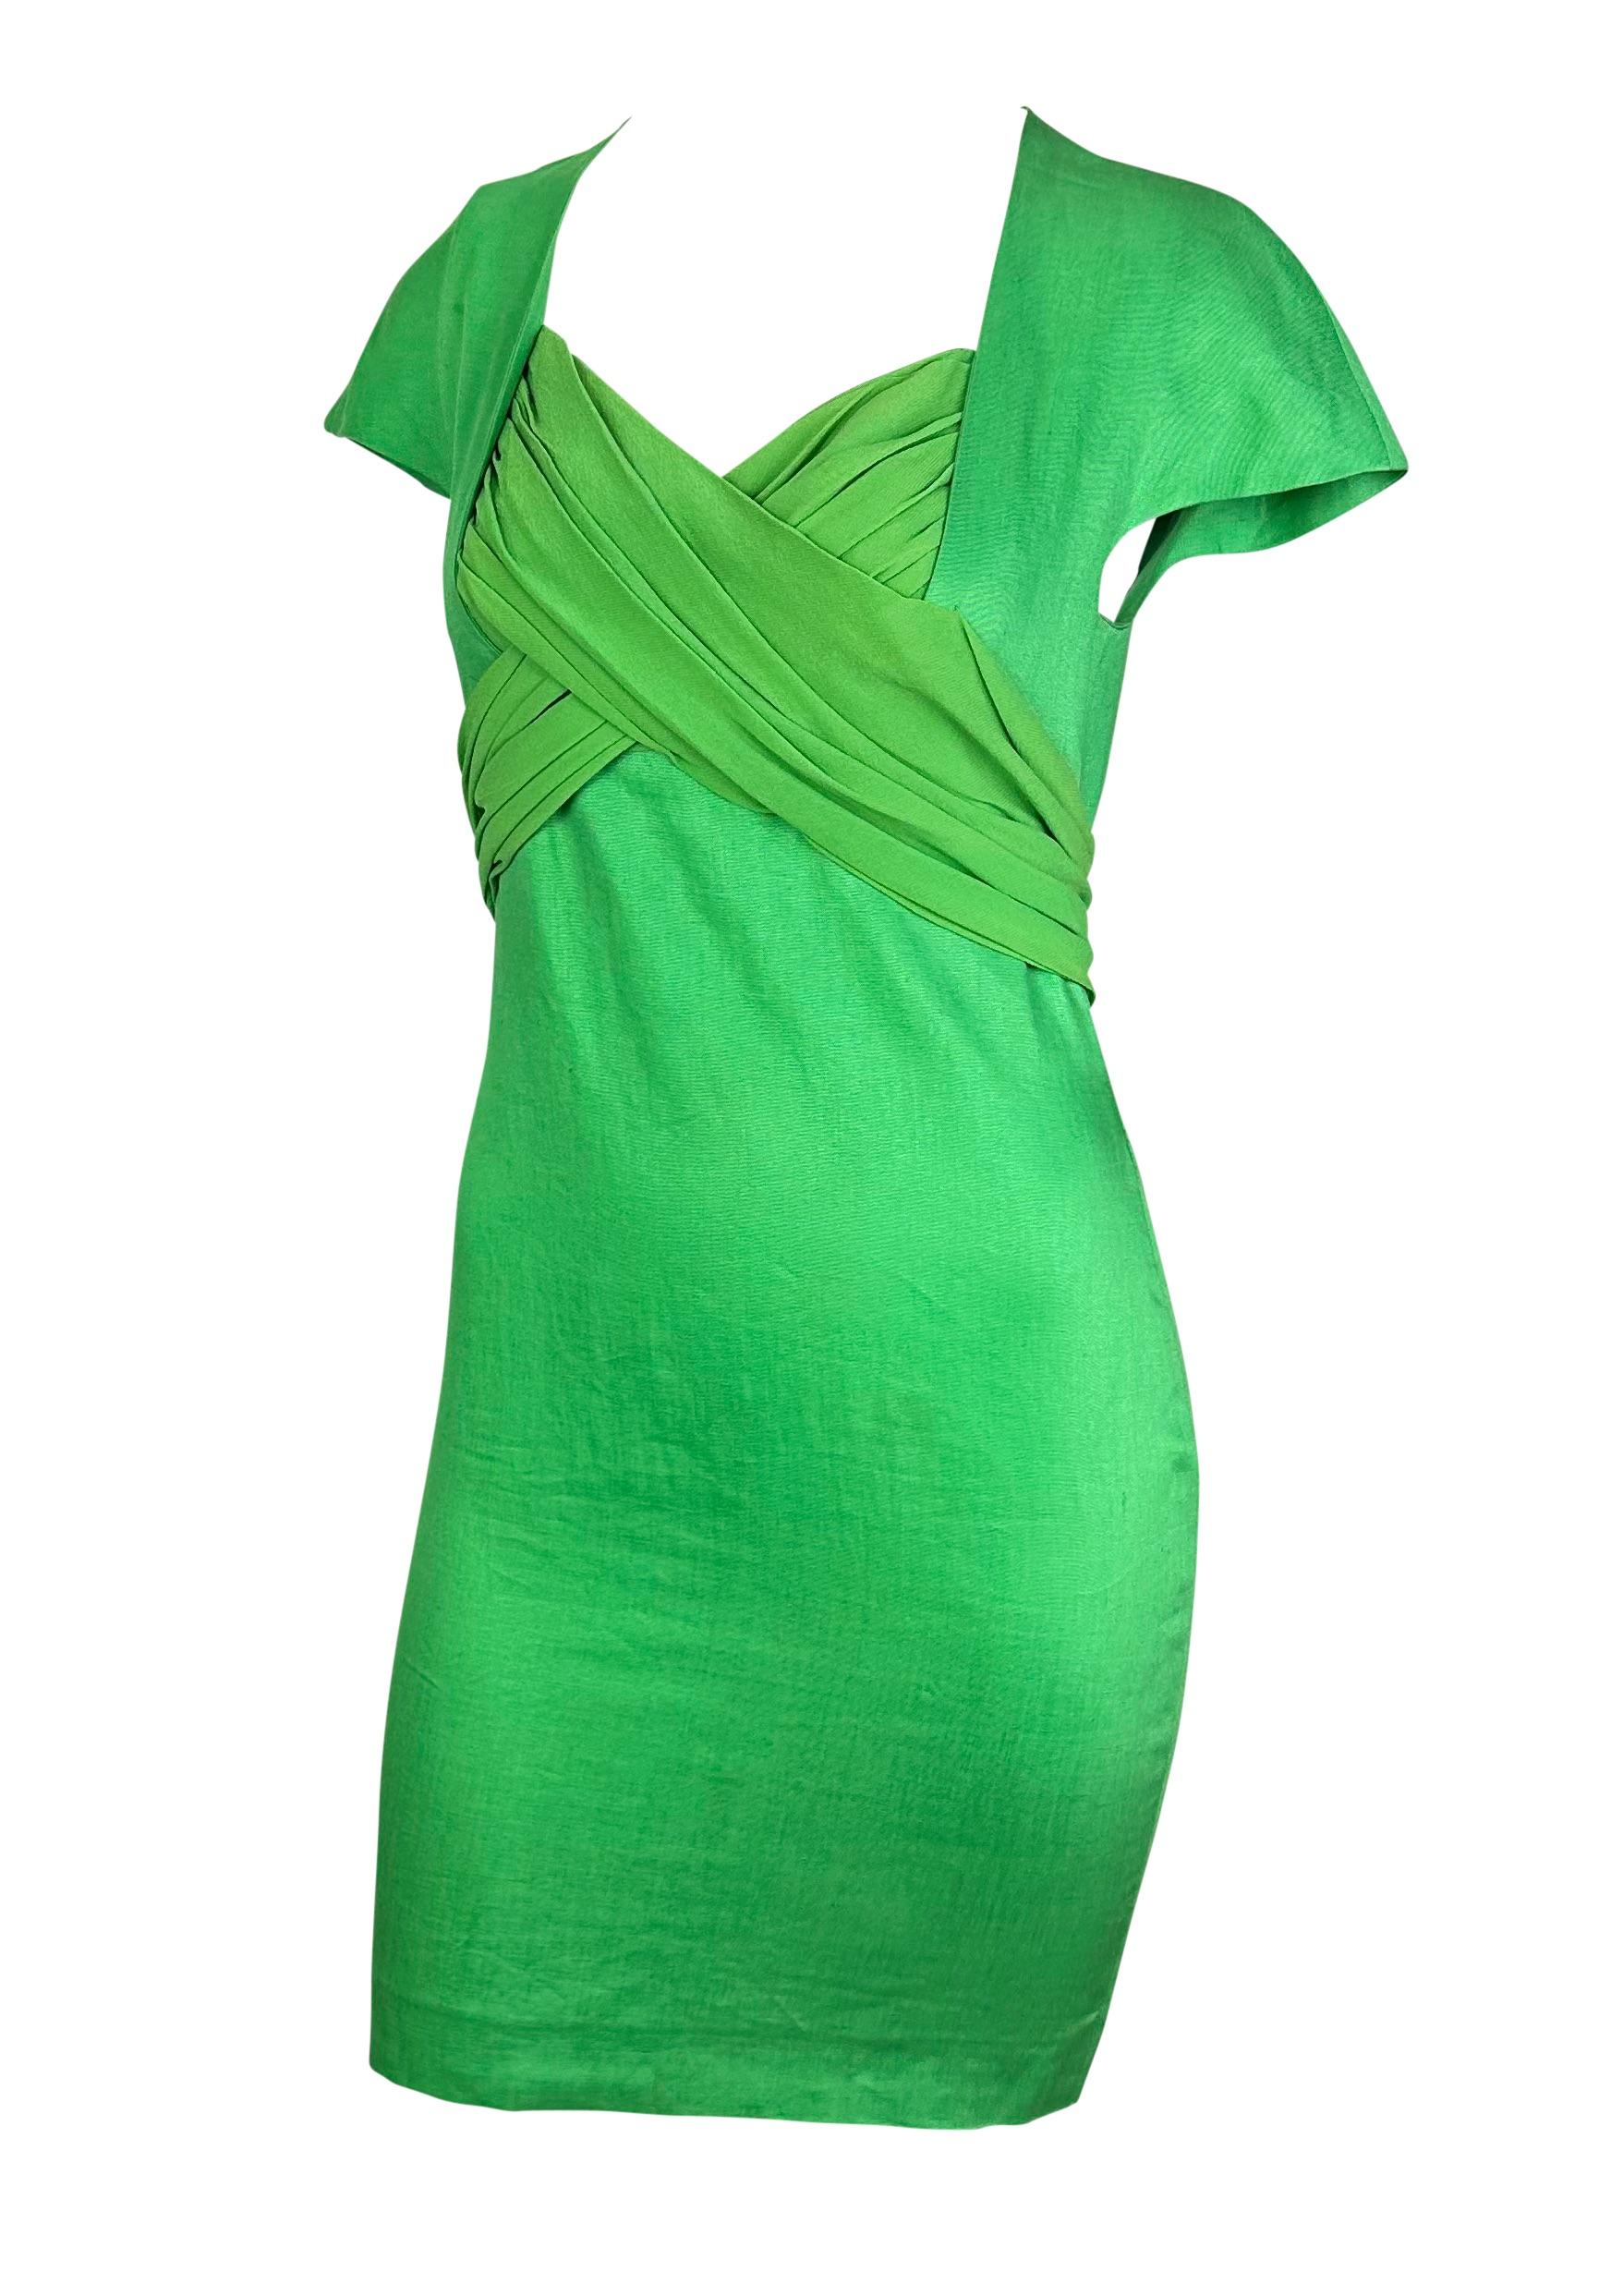 Presenting a fabulous bright green linen Gianni Versace Couture dress, designed by Gianni Versace. Debuting in the the Spring/Summer 1989 runway presentation, this vibrant mini dress features petal-style sleeves and is made complete with ruched